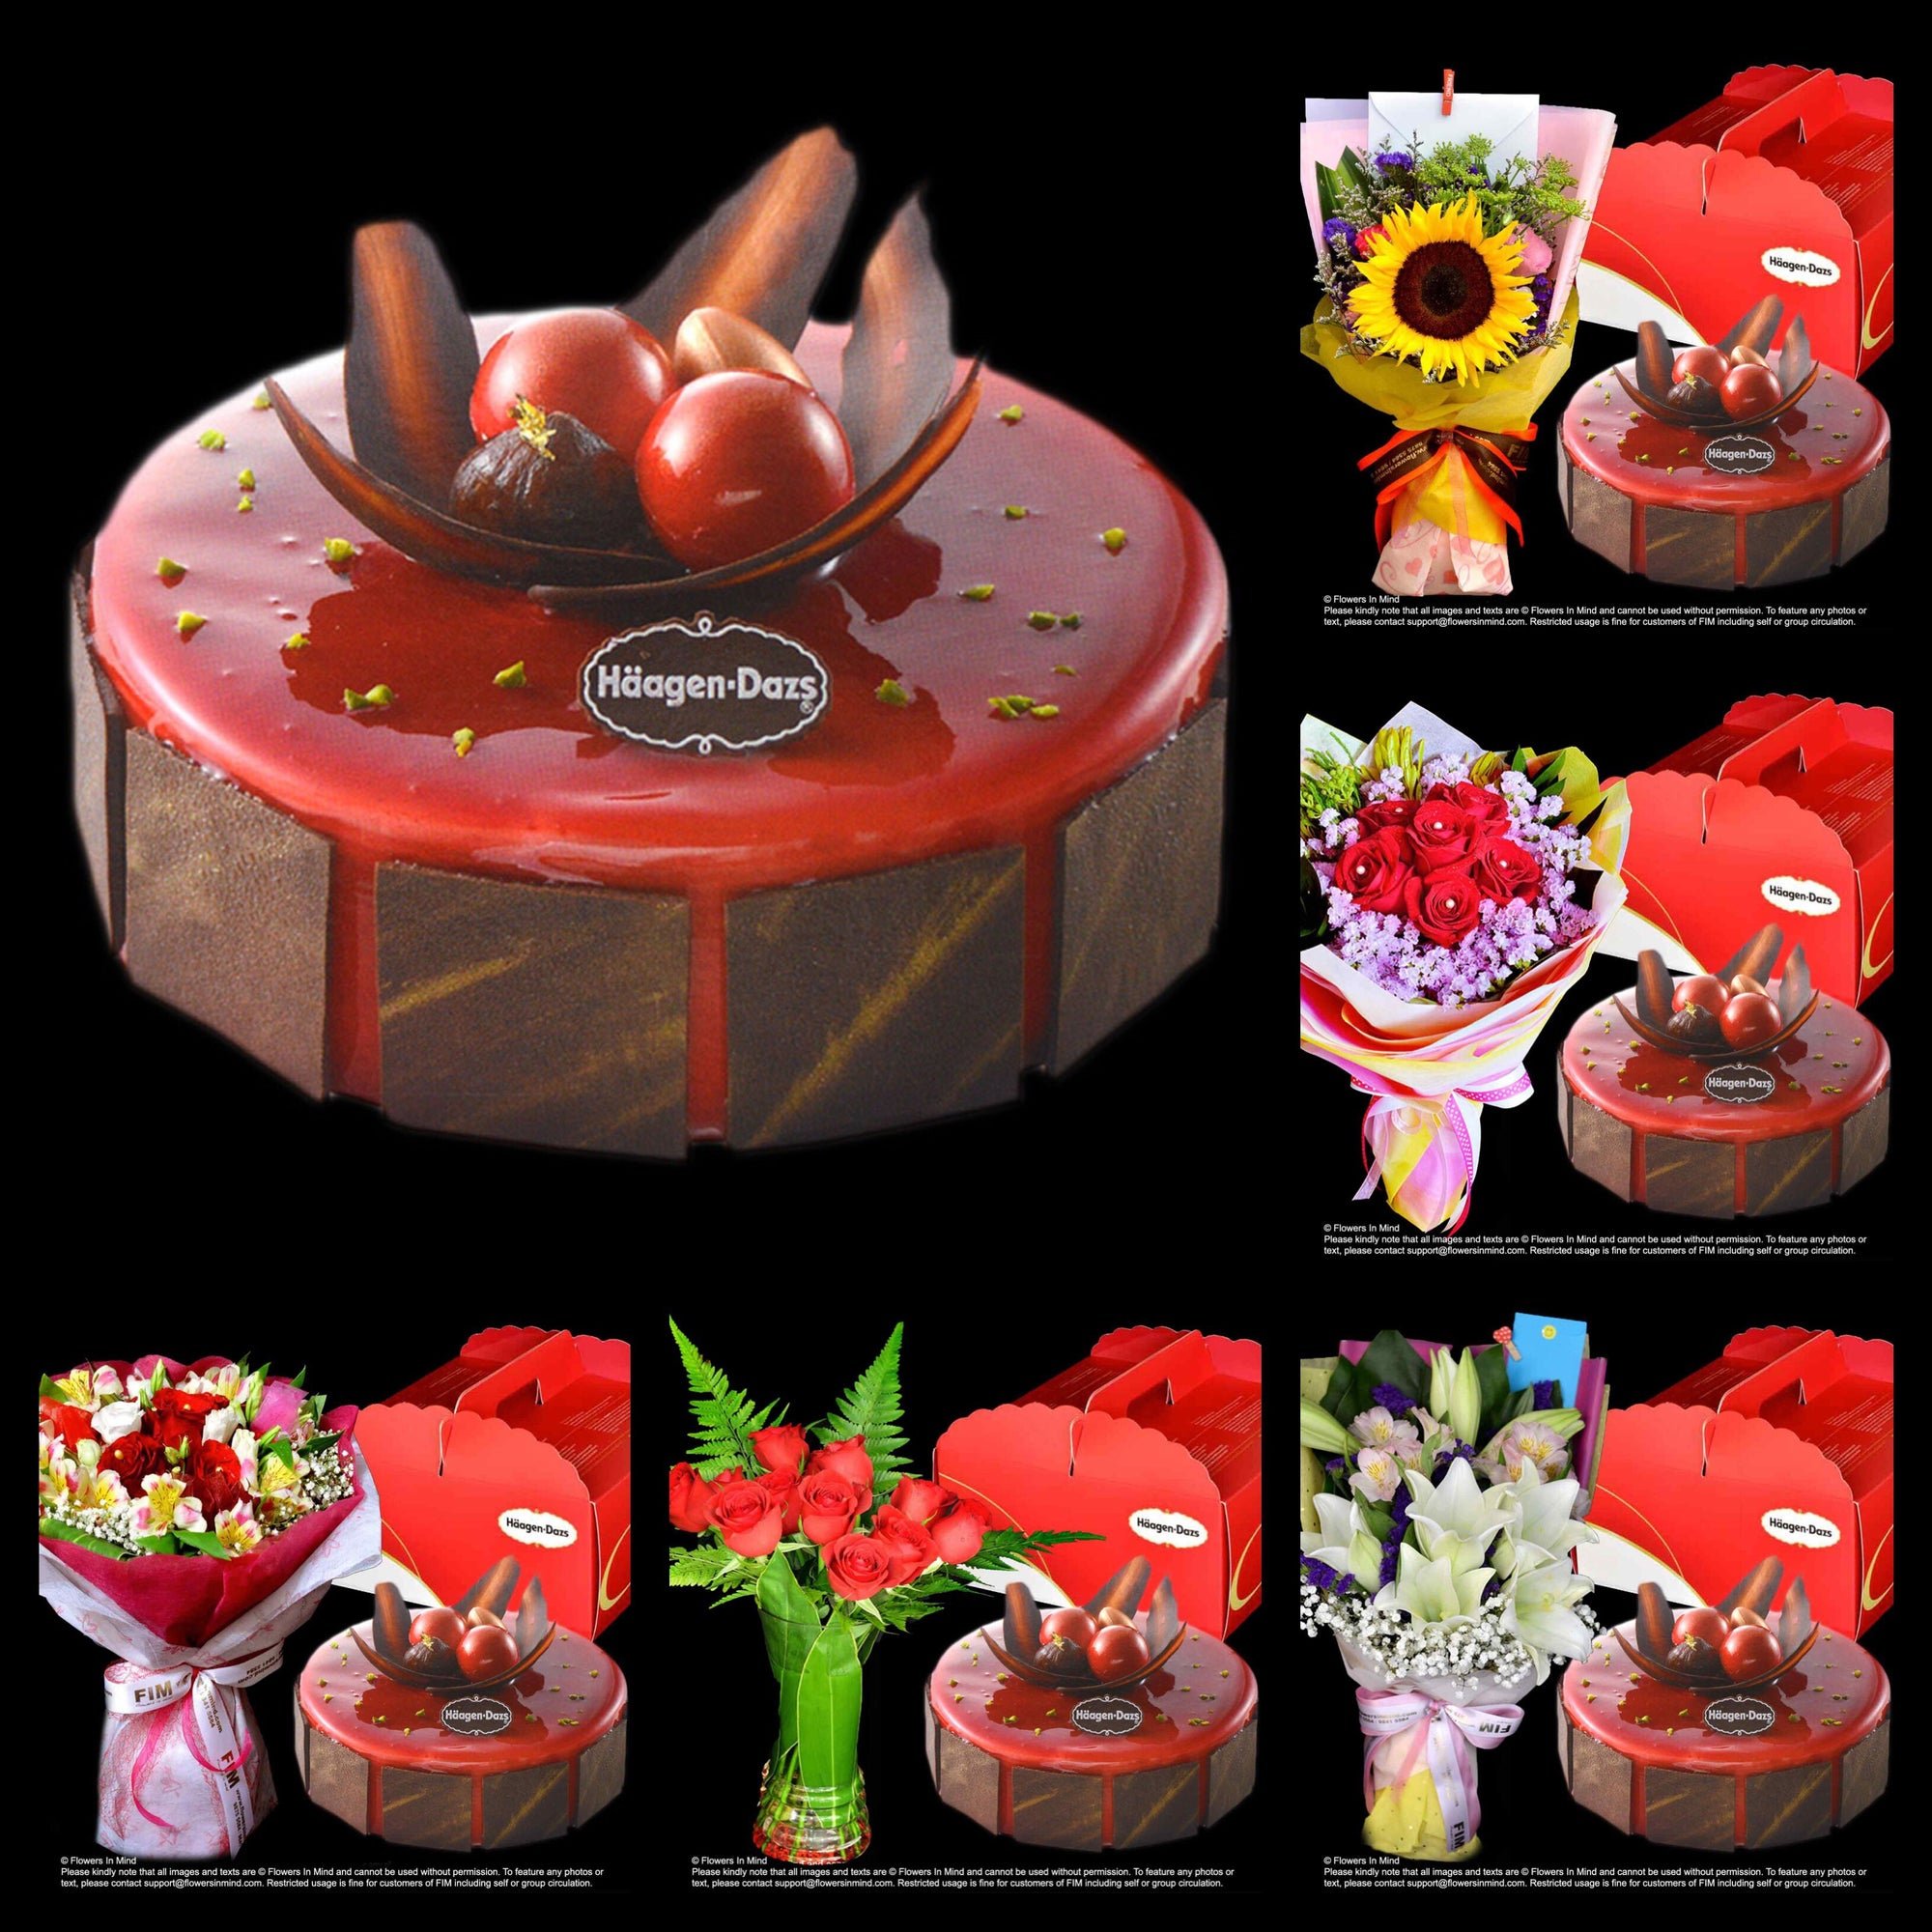 ICE CREAM CAKE LOVE MOMENT from Haagen Dazs with flowers ...